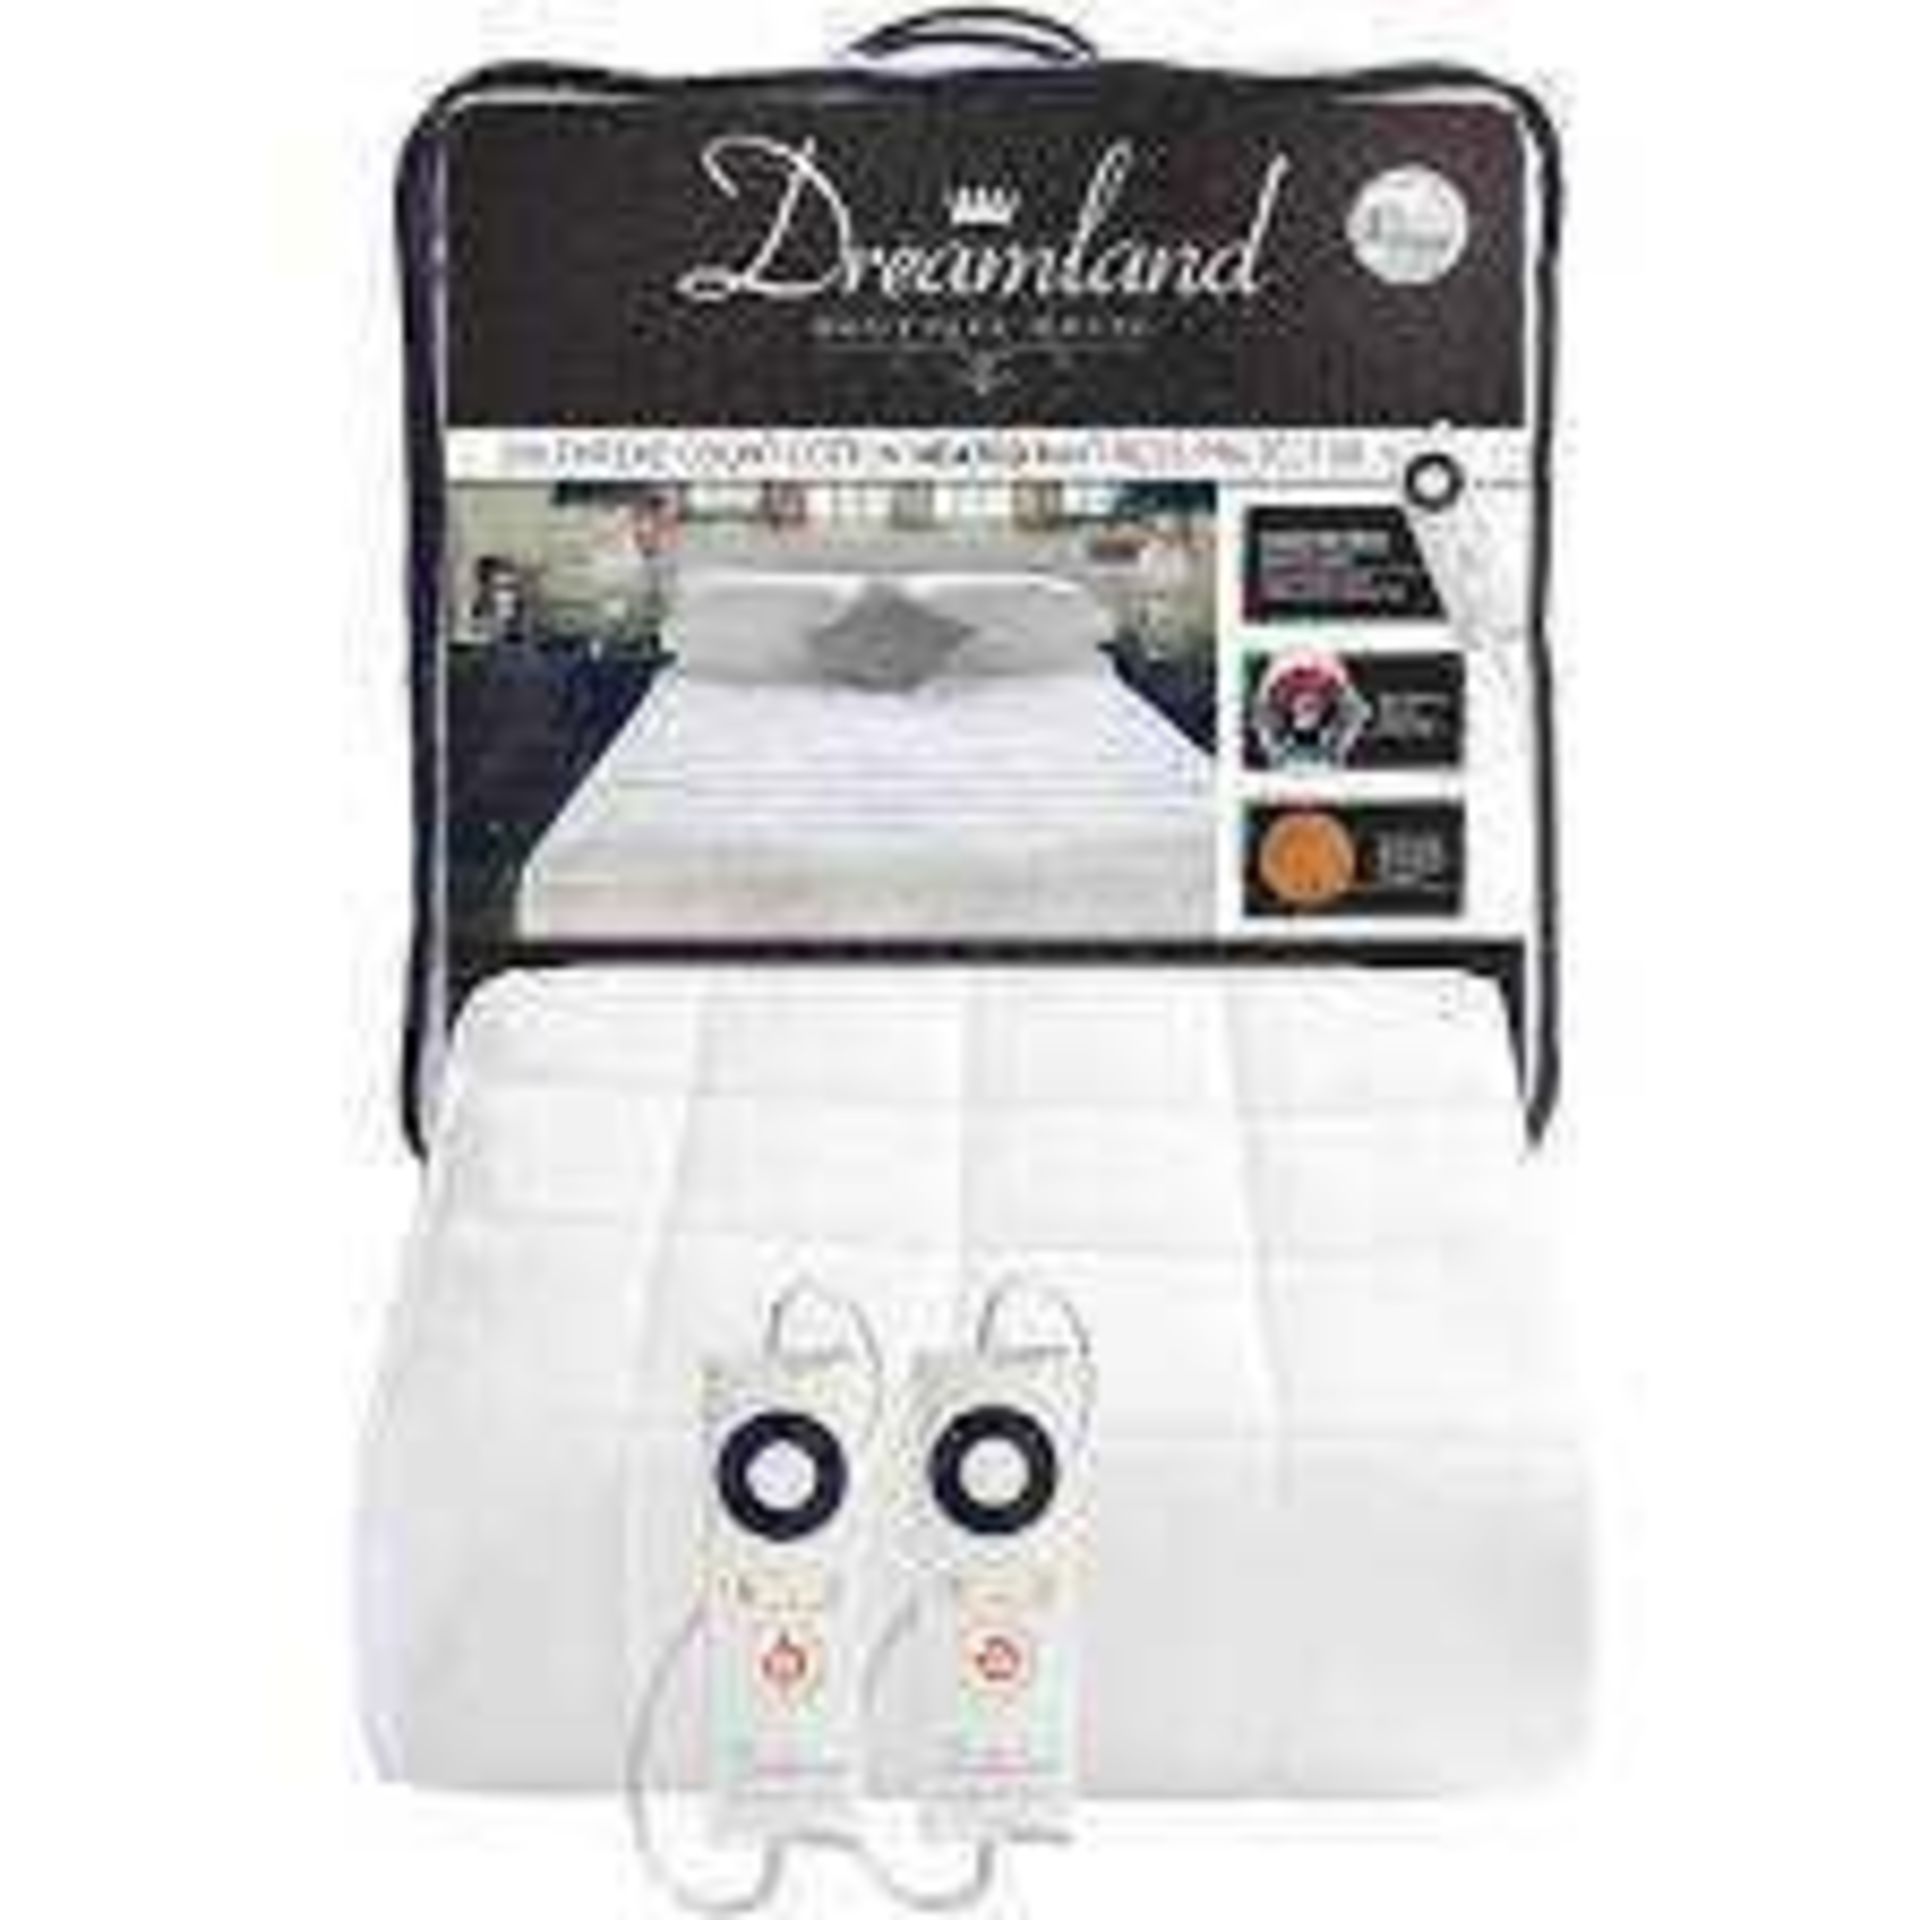 Rrp £95 Bagged Dreamland Intelliheat Electrically Heated Boutique Hotel Collection 200 Thread Count